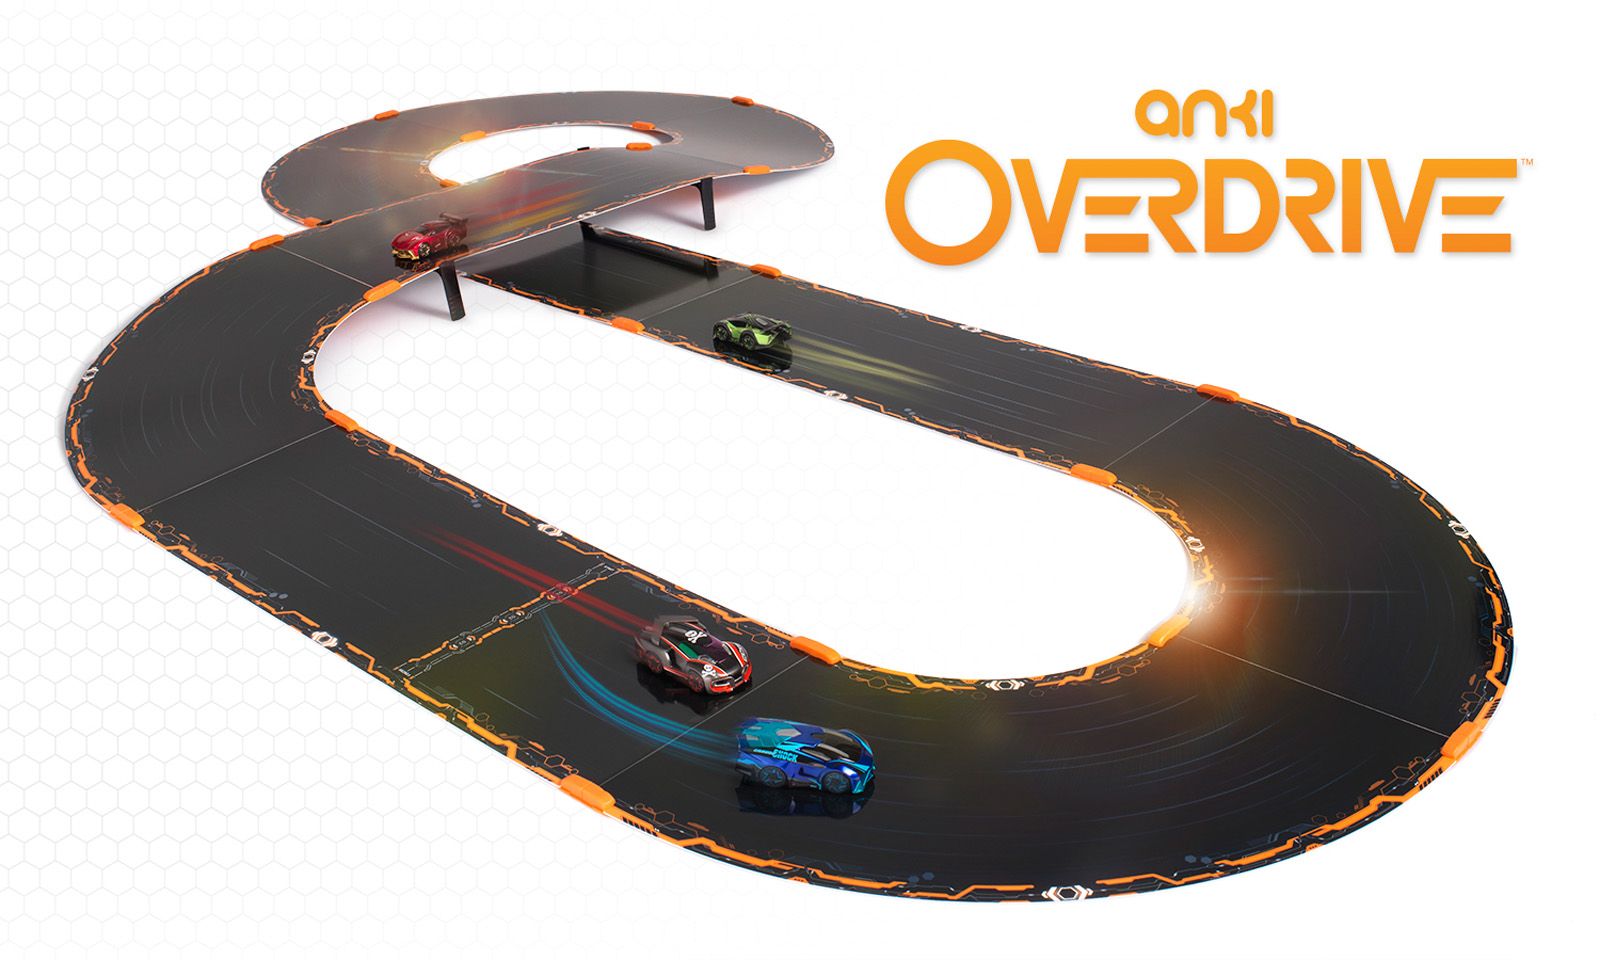 anki overdrive vs anki drive all the new features explained image 5